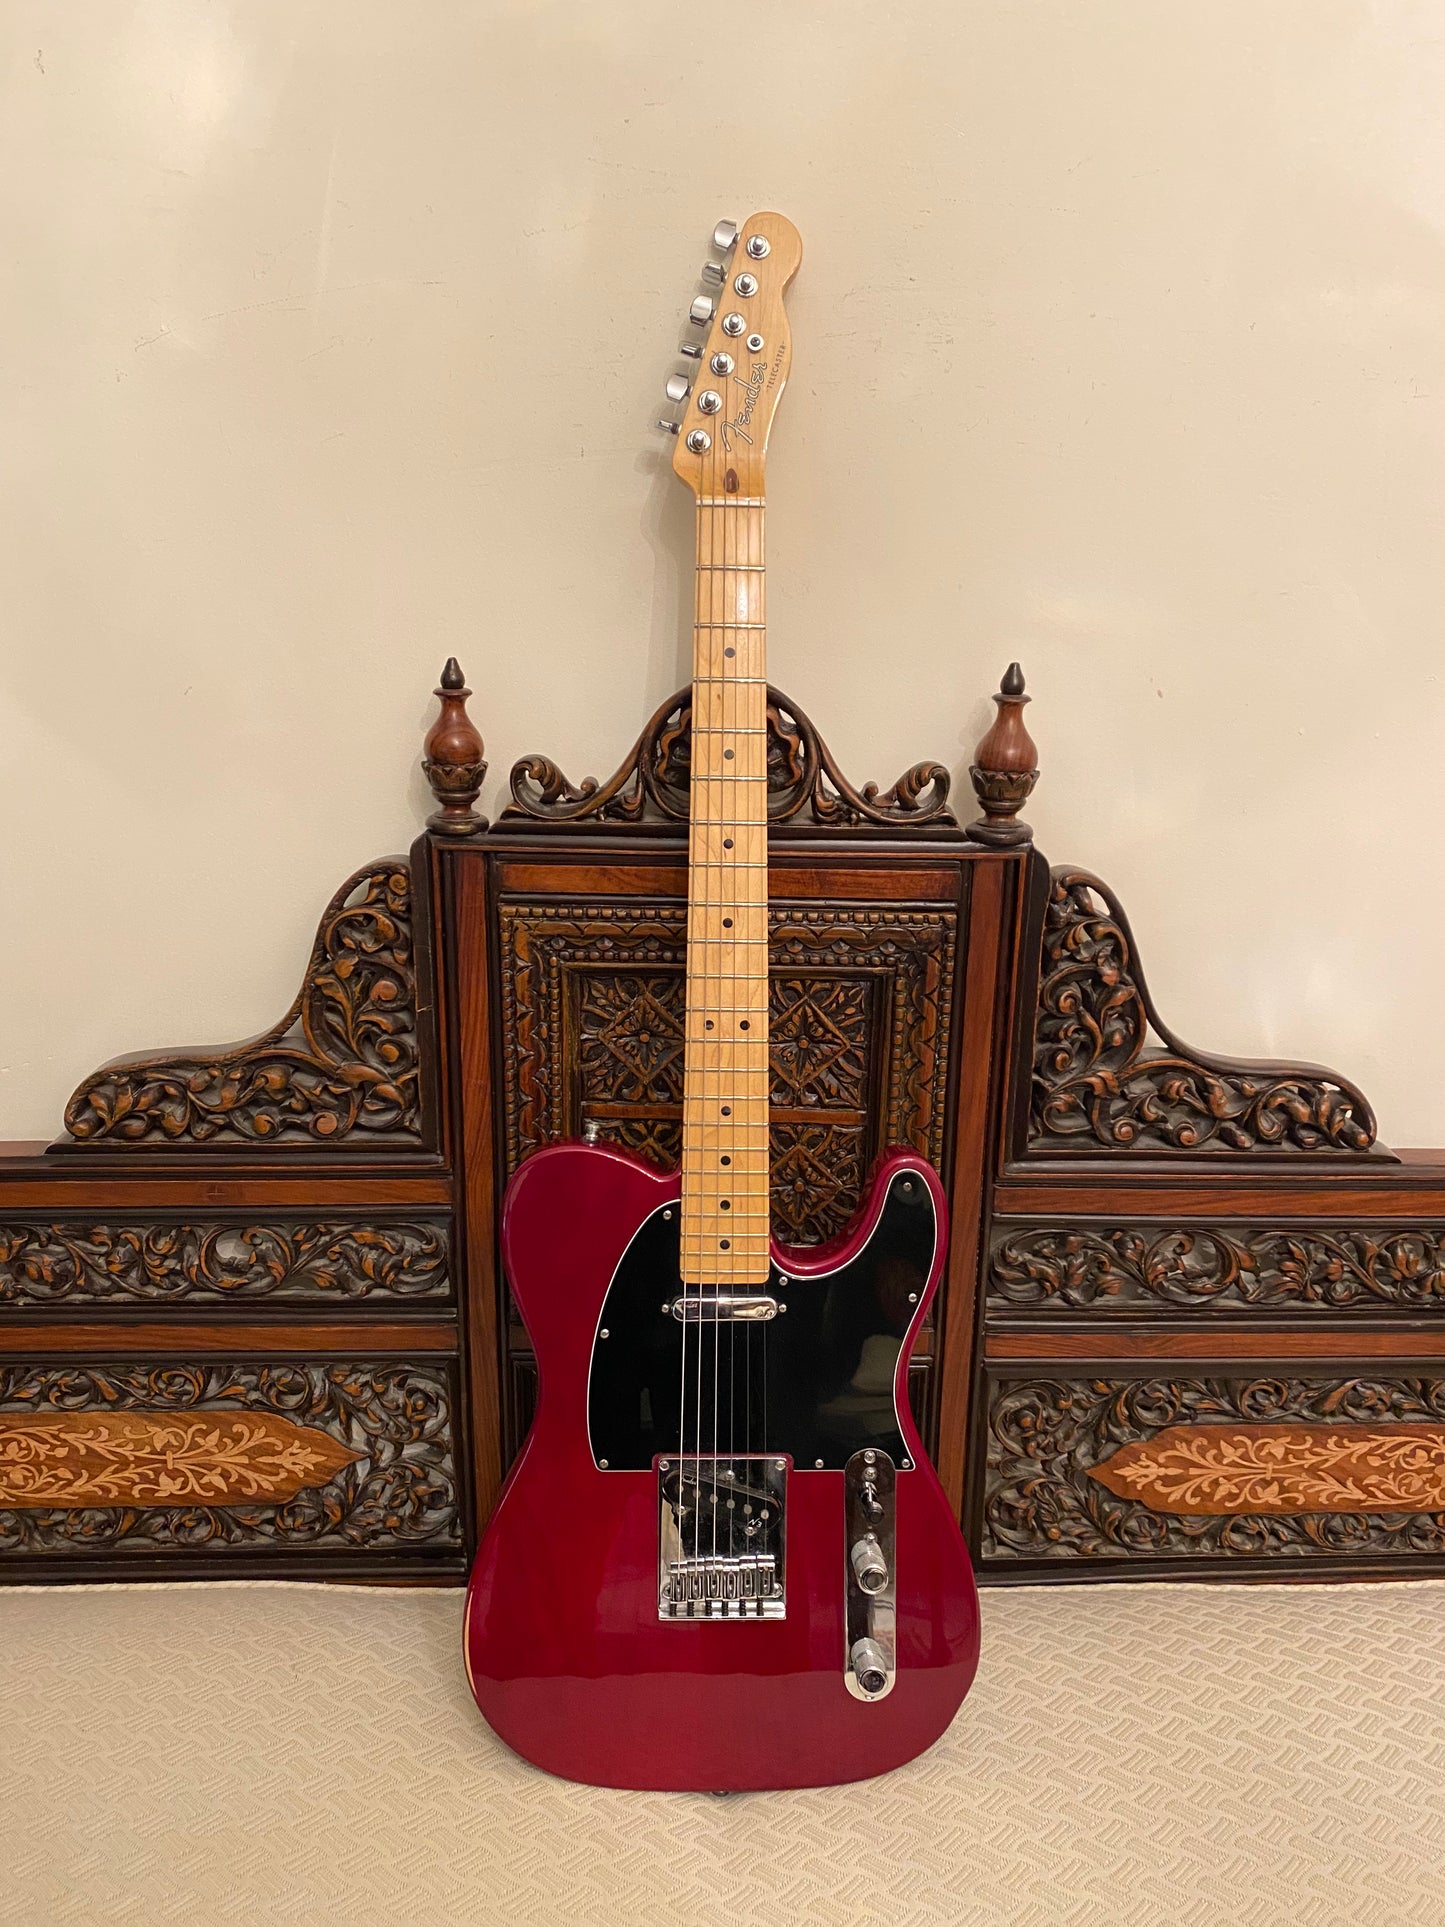 Fender American Deluxe Ash Telecaster 60th anniversary